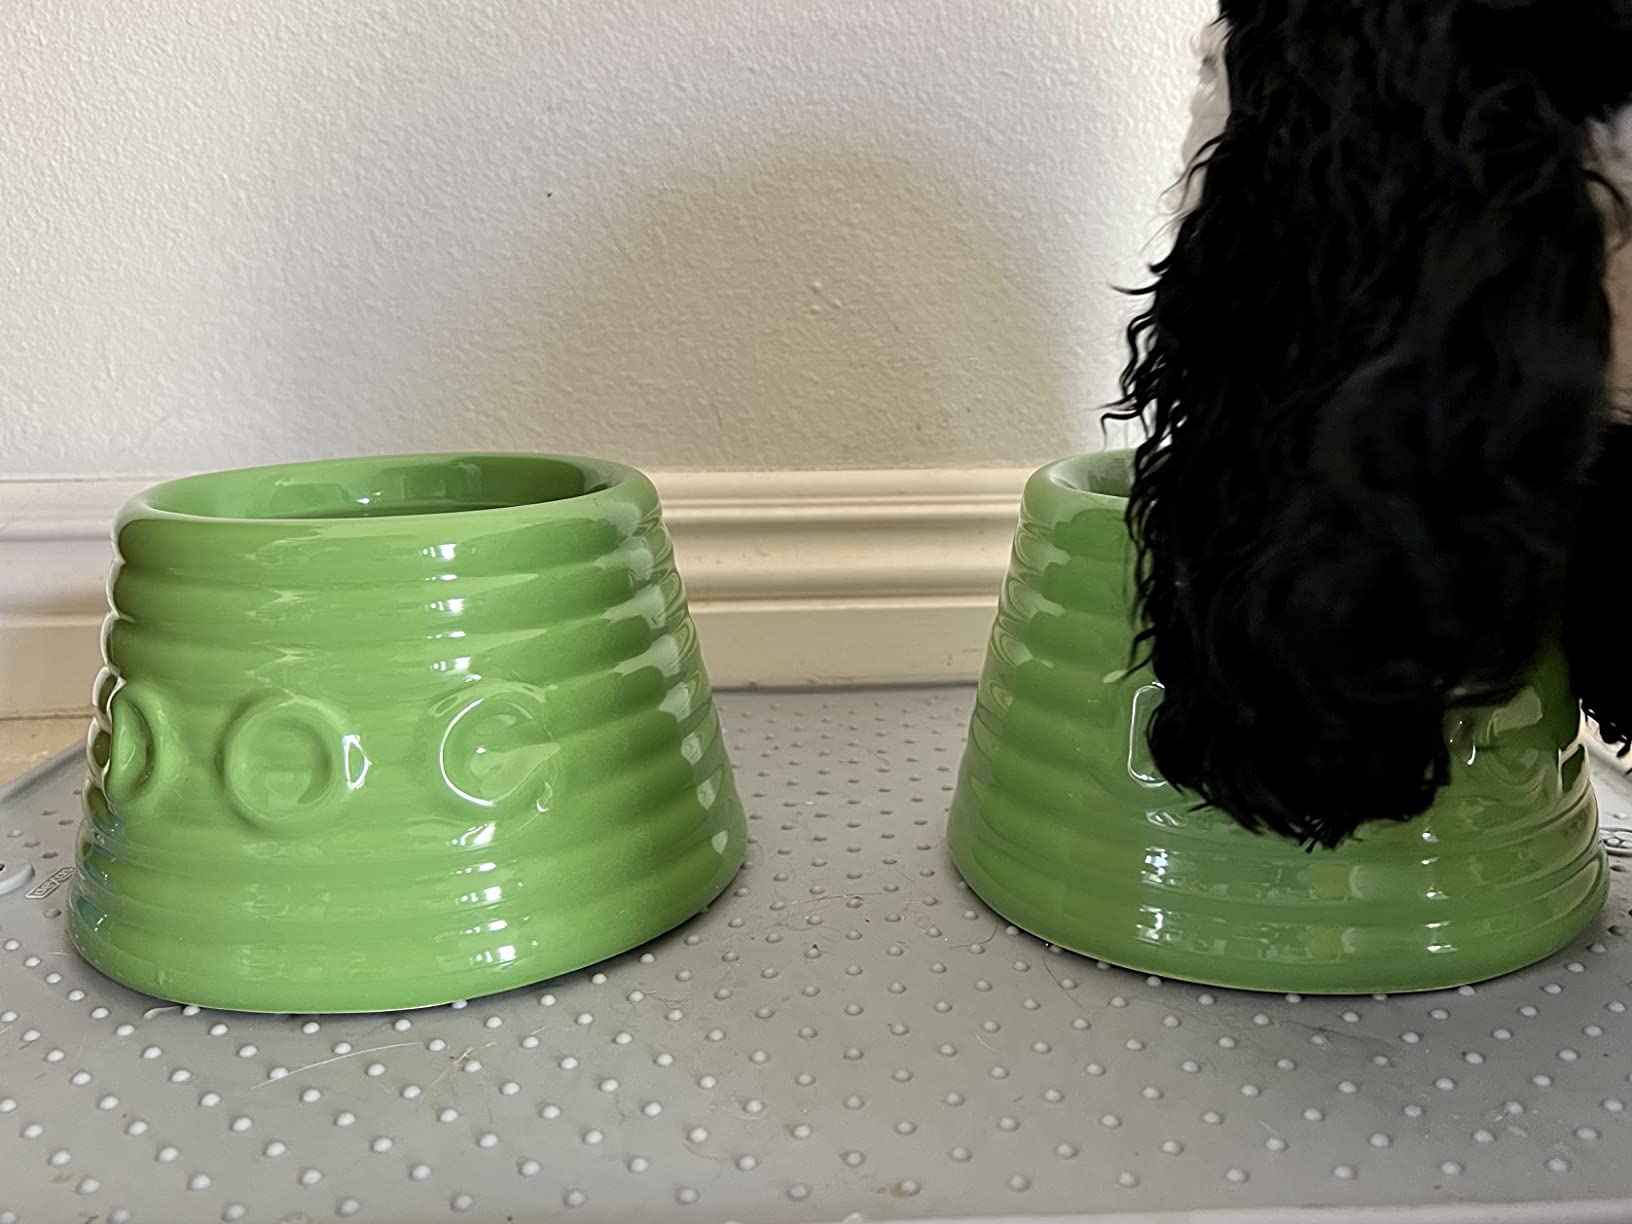 Best dog bowls for cocker spaniels: Bauer Pottery Bowl